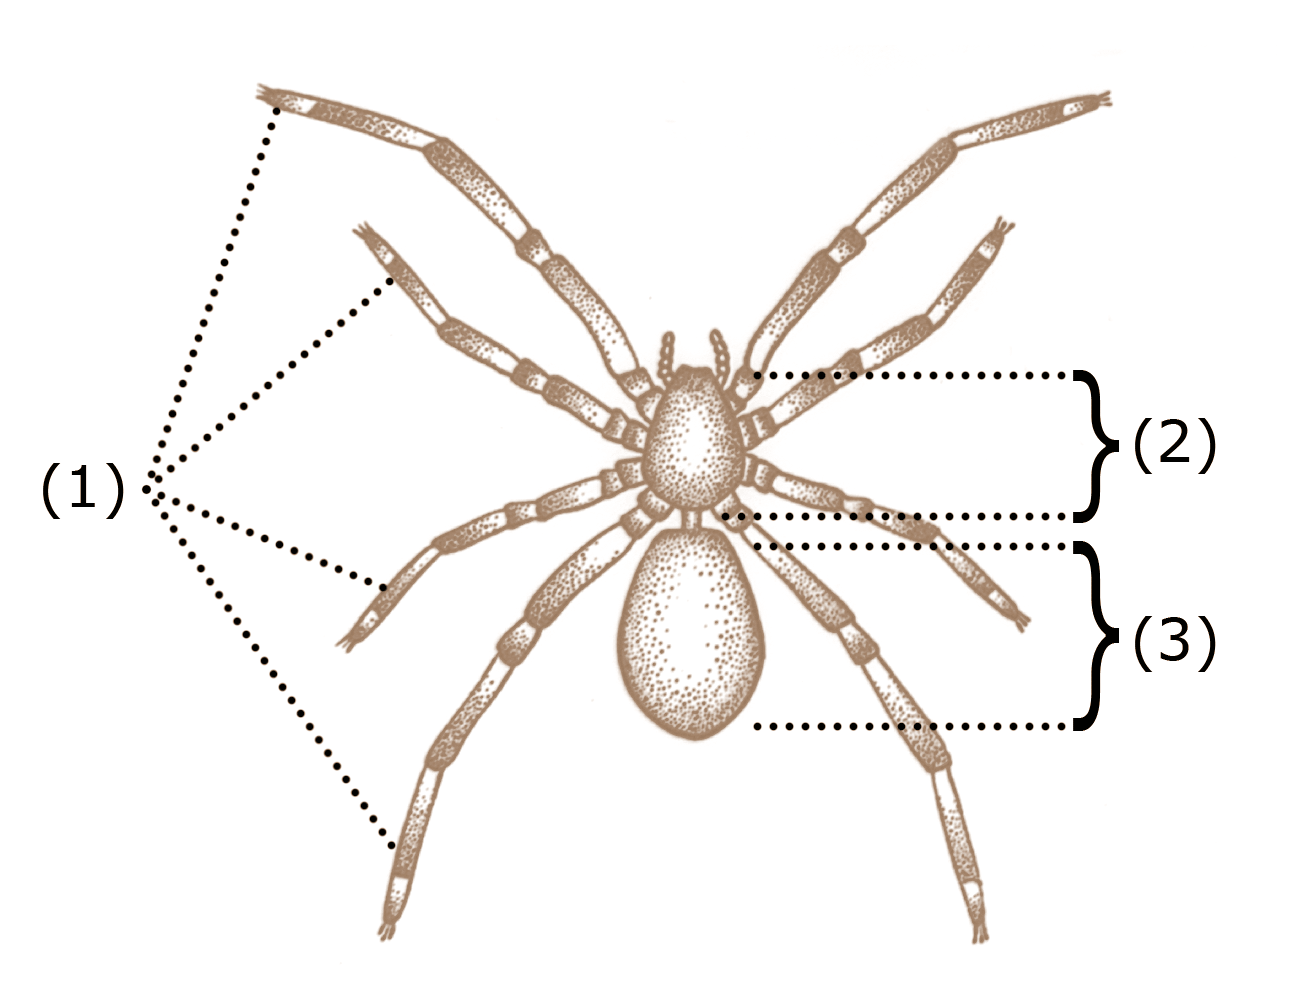 What are spiders legs?